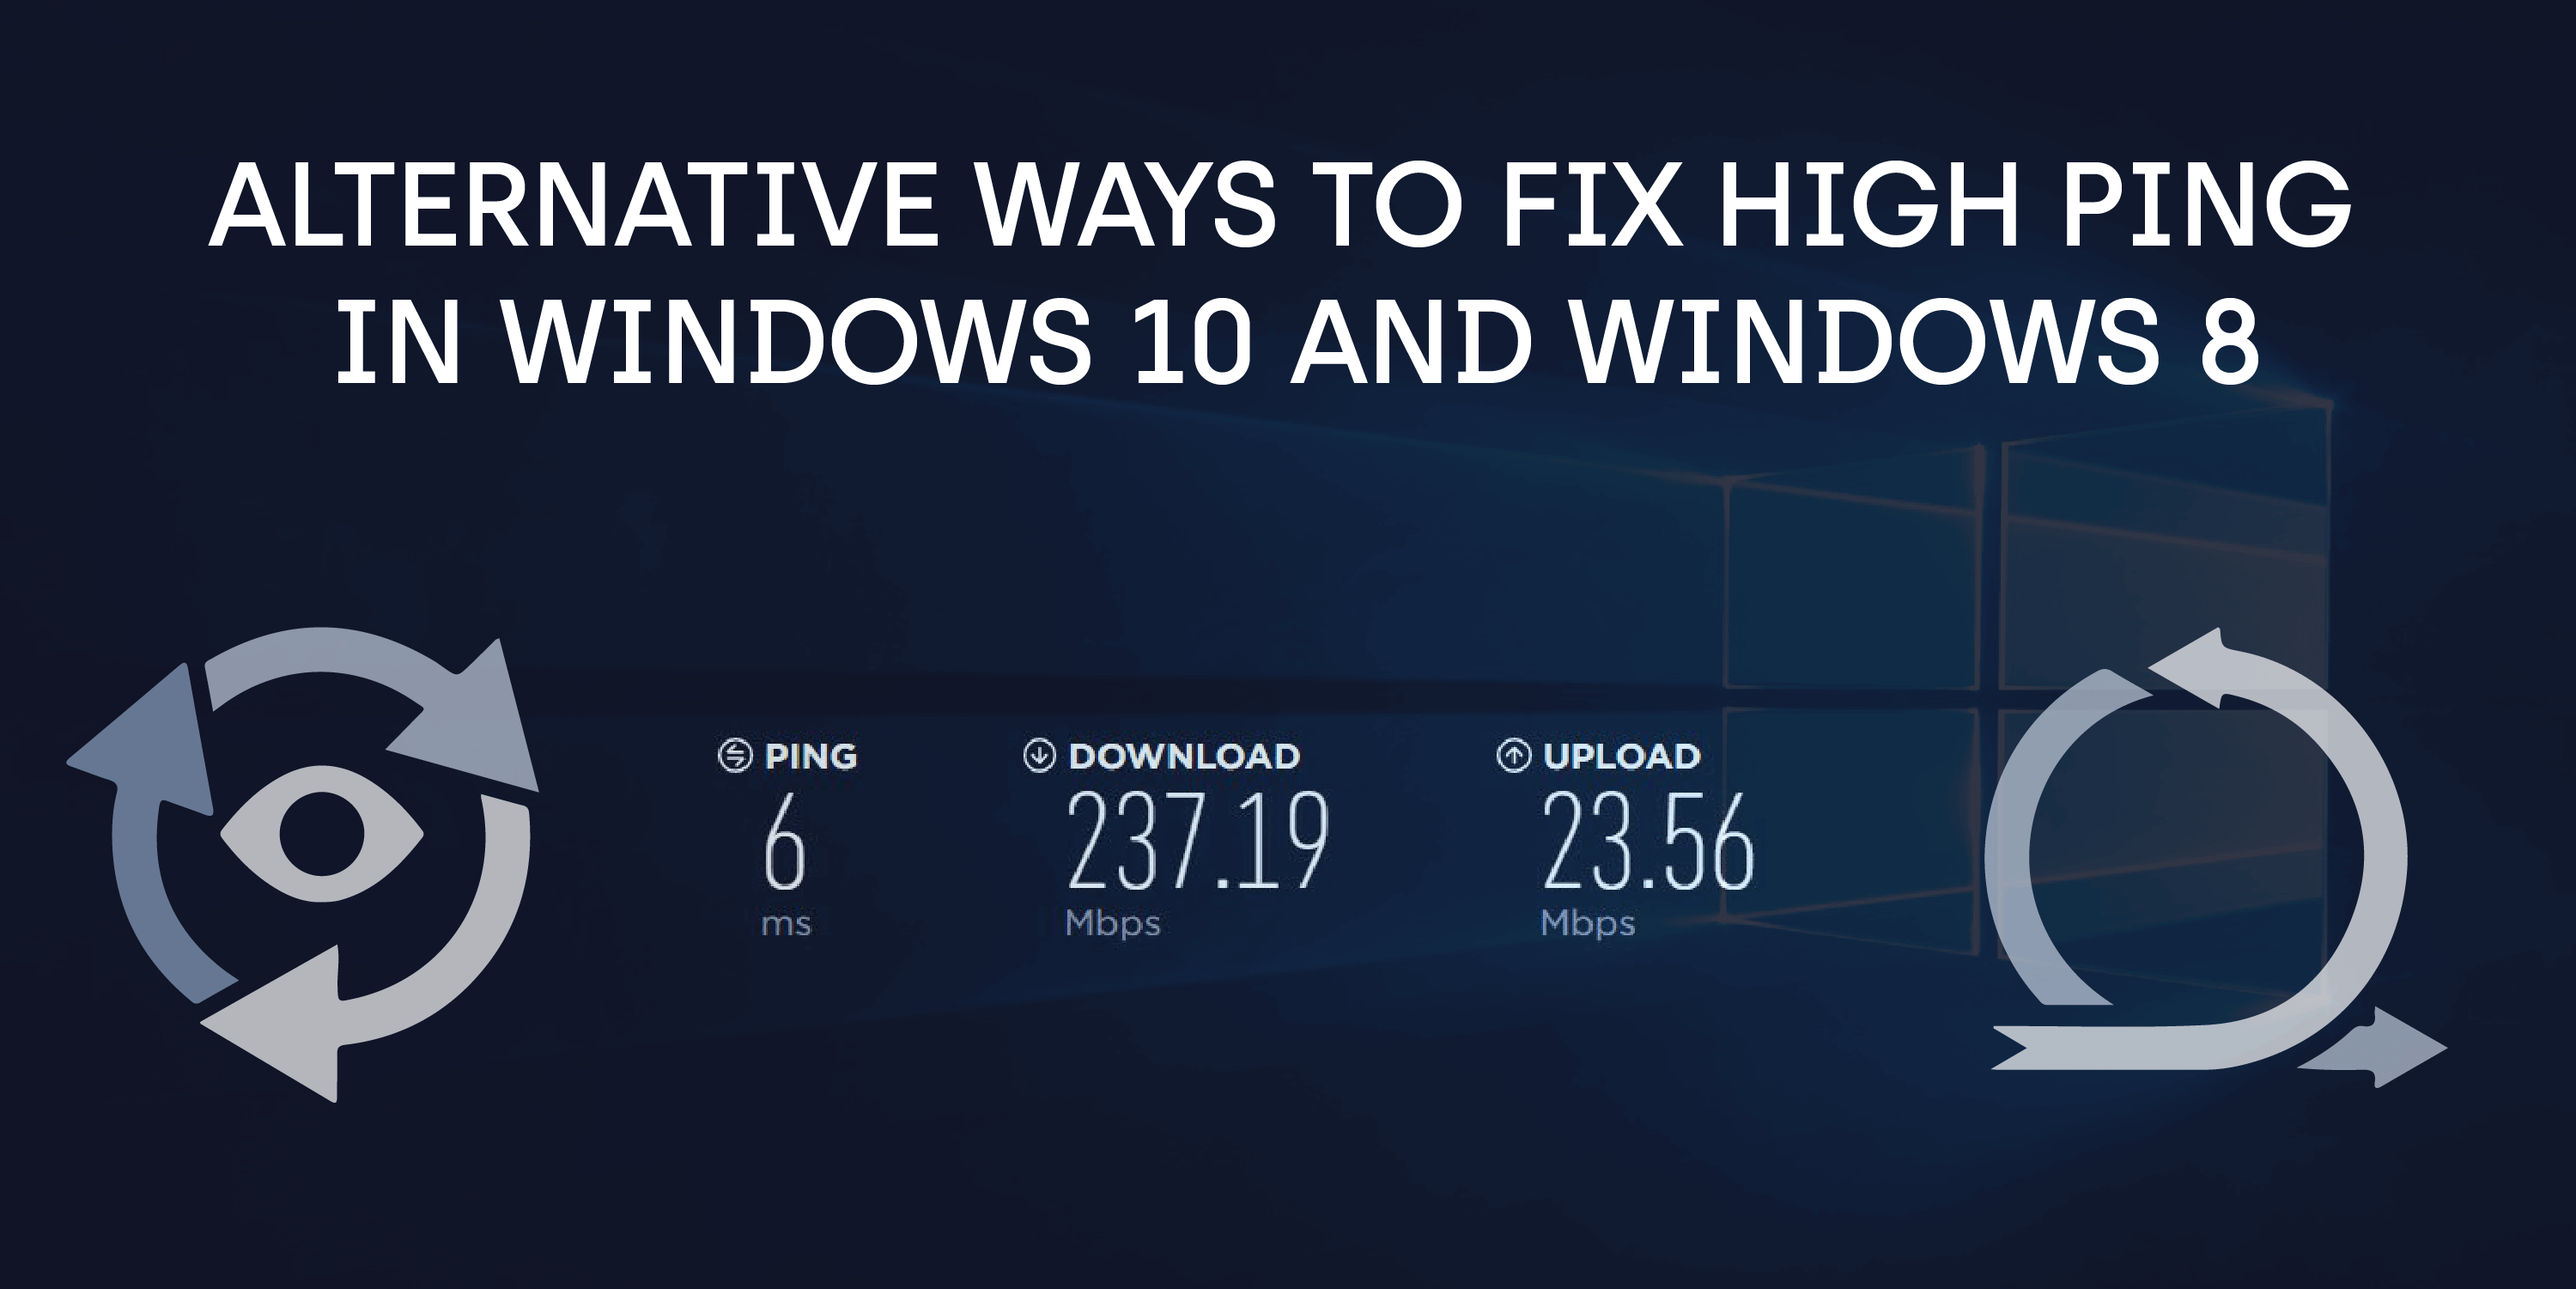 ALTERNATIVE WAYS TO FIX HIGH PING IN WINDOWS 10 AND WINDOWS 8